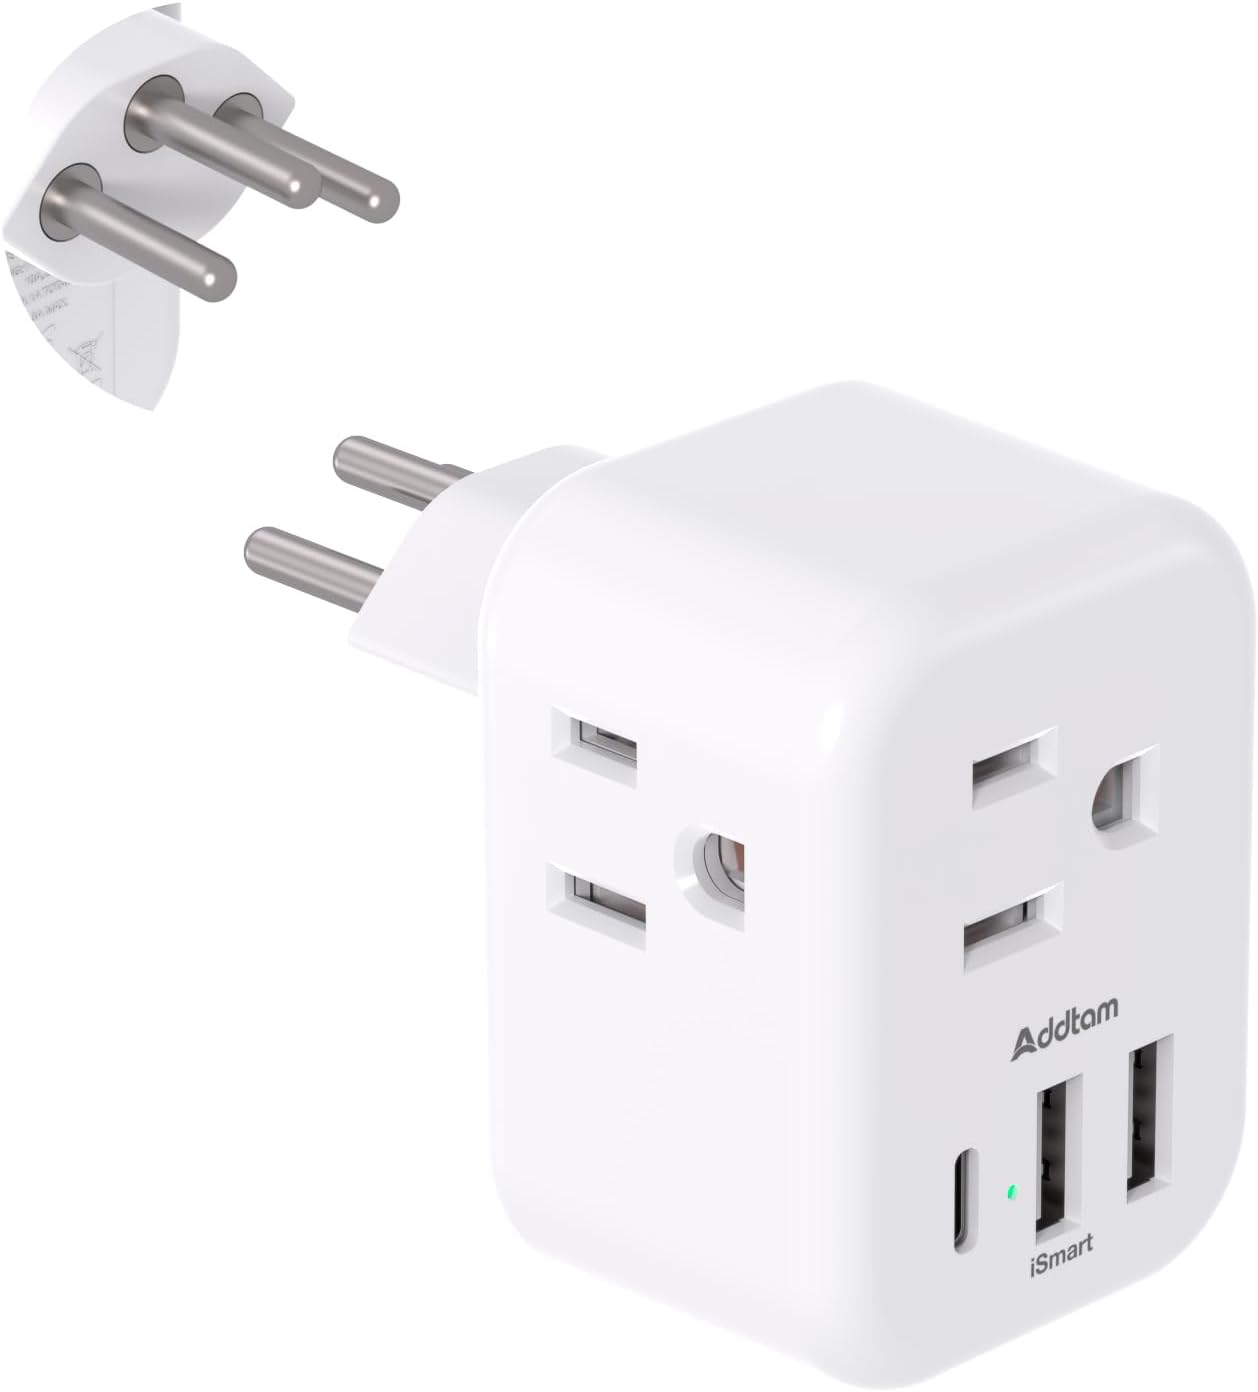 As a traveler, having a reliable plug adapter is essential for ensuring that my devices stay powered up wherever I am traveling. The Addtam US to UK Ireland Plug Adapter has proven to be an indispensable travel companion, offering a perfect blend of functionality, versatility, and compact design.The purpose of the Addtam Type G Power Adapter is its compatibility with UK and Ireland outlets, making it an ideal solution for my travels to these regions. The adapter effortlessly converts my US plugs